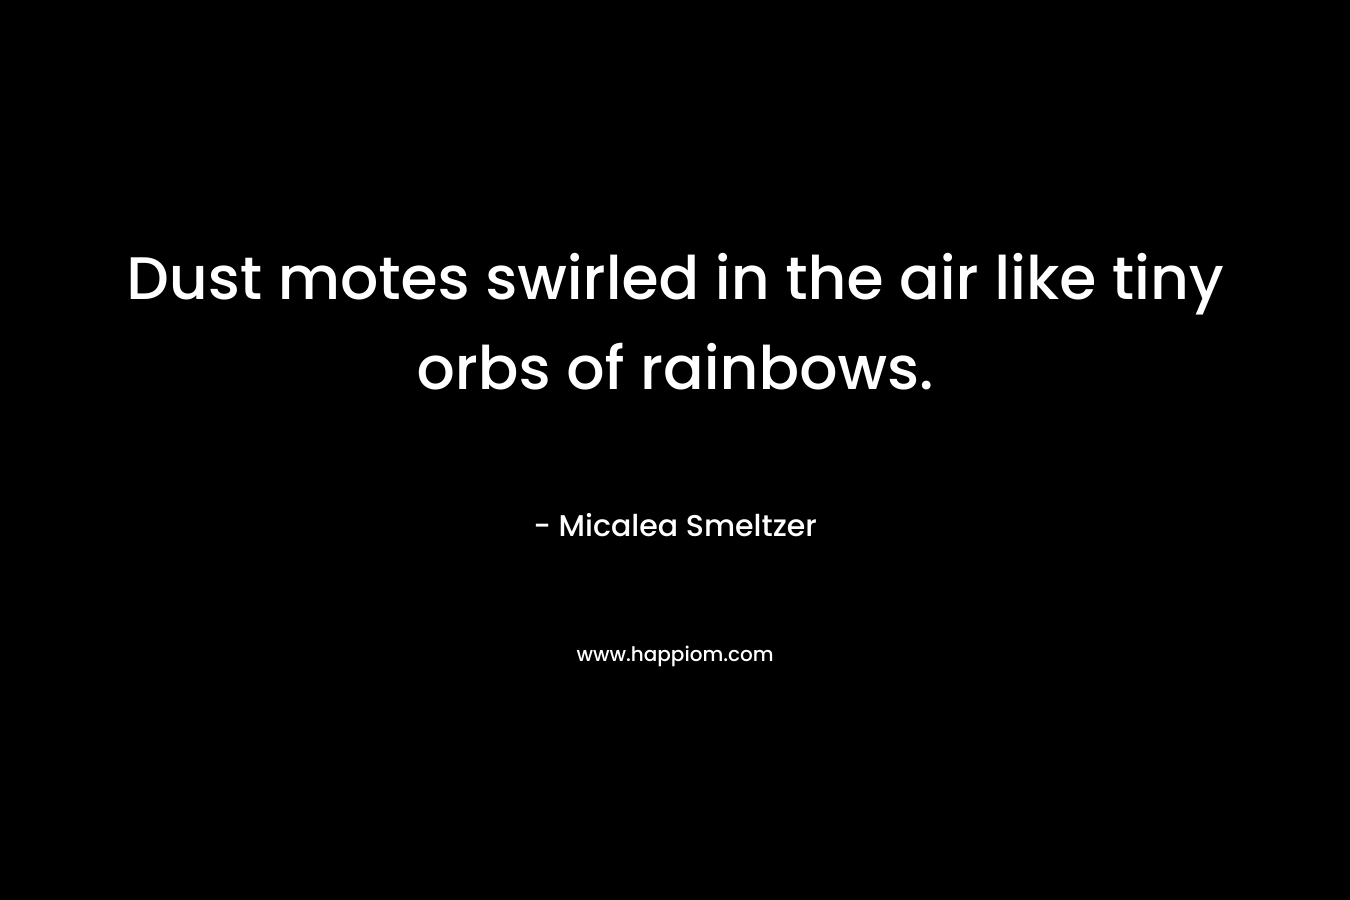 Dust motes swirled in the air like tiny orbs of rainbows. – Micalea Smeltzer